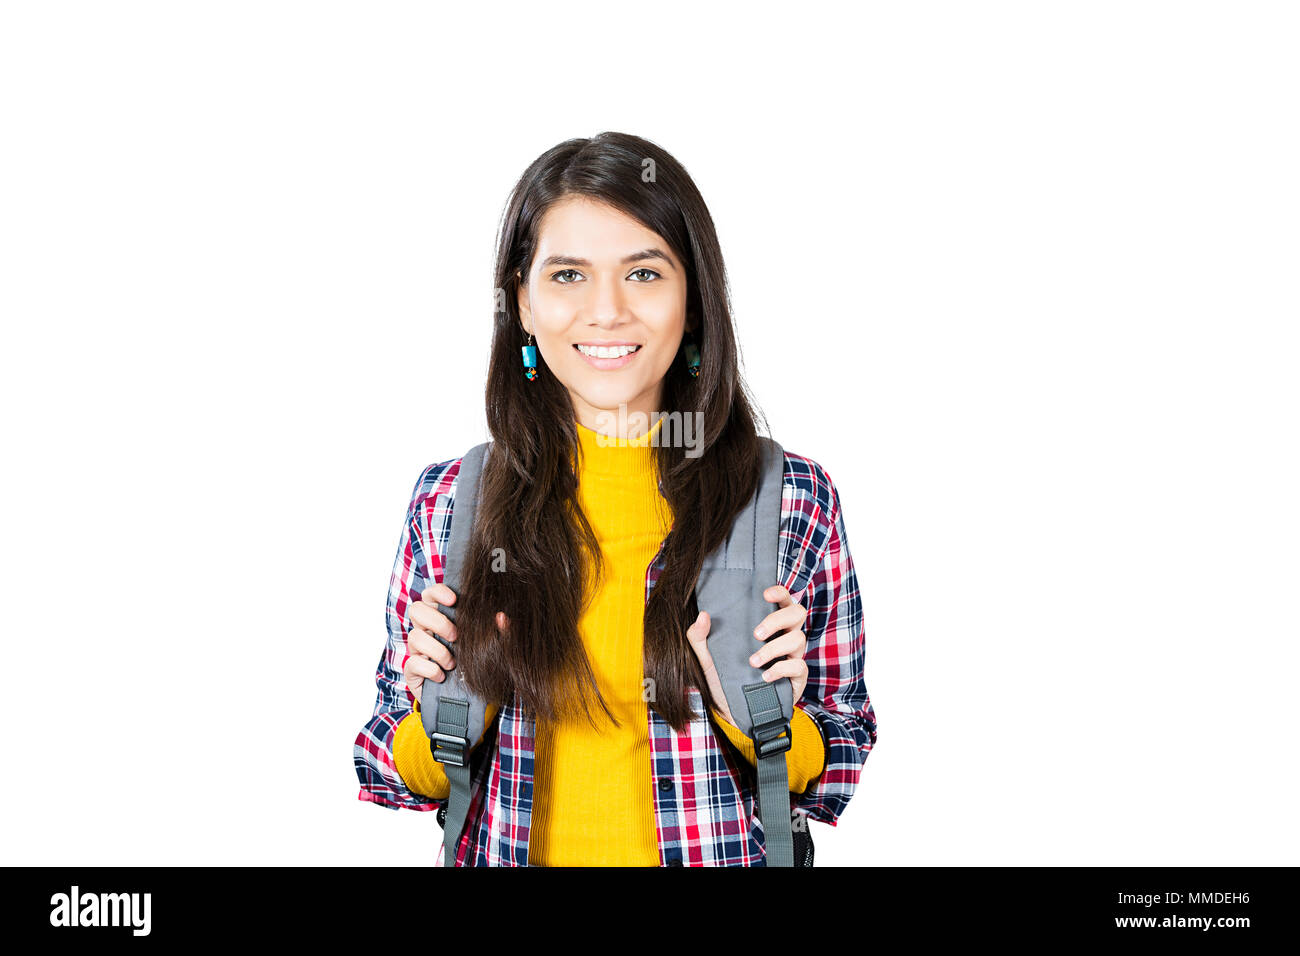 One Teenage Girl College Student Showing Thumbs up Successful Education Stock Photo